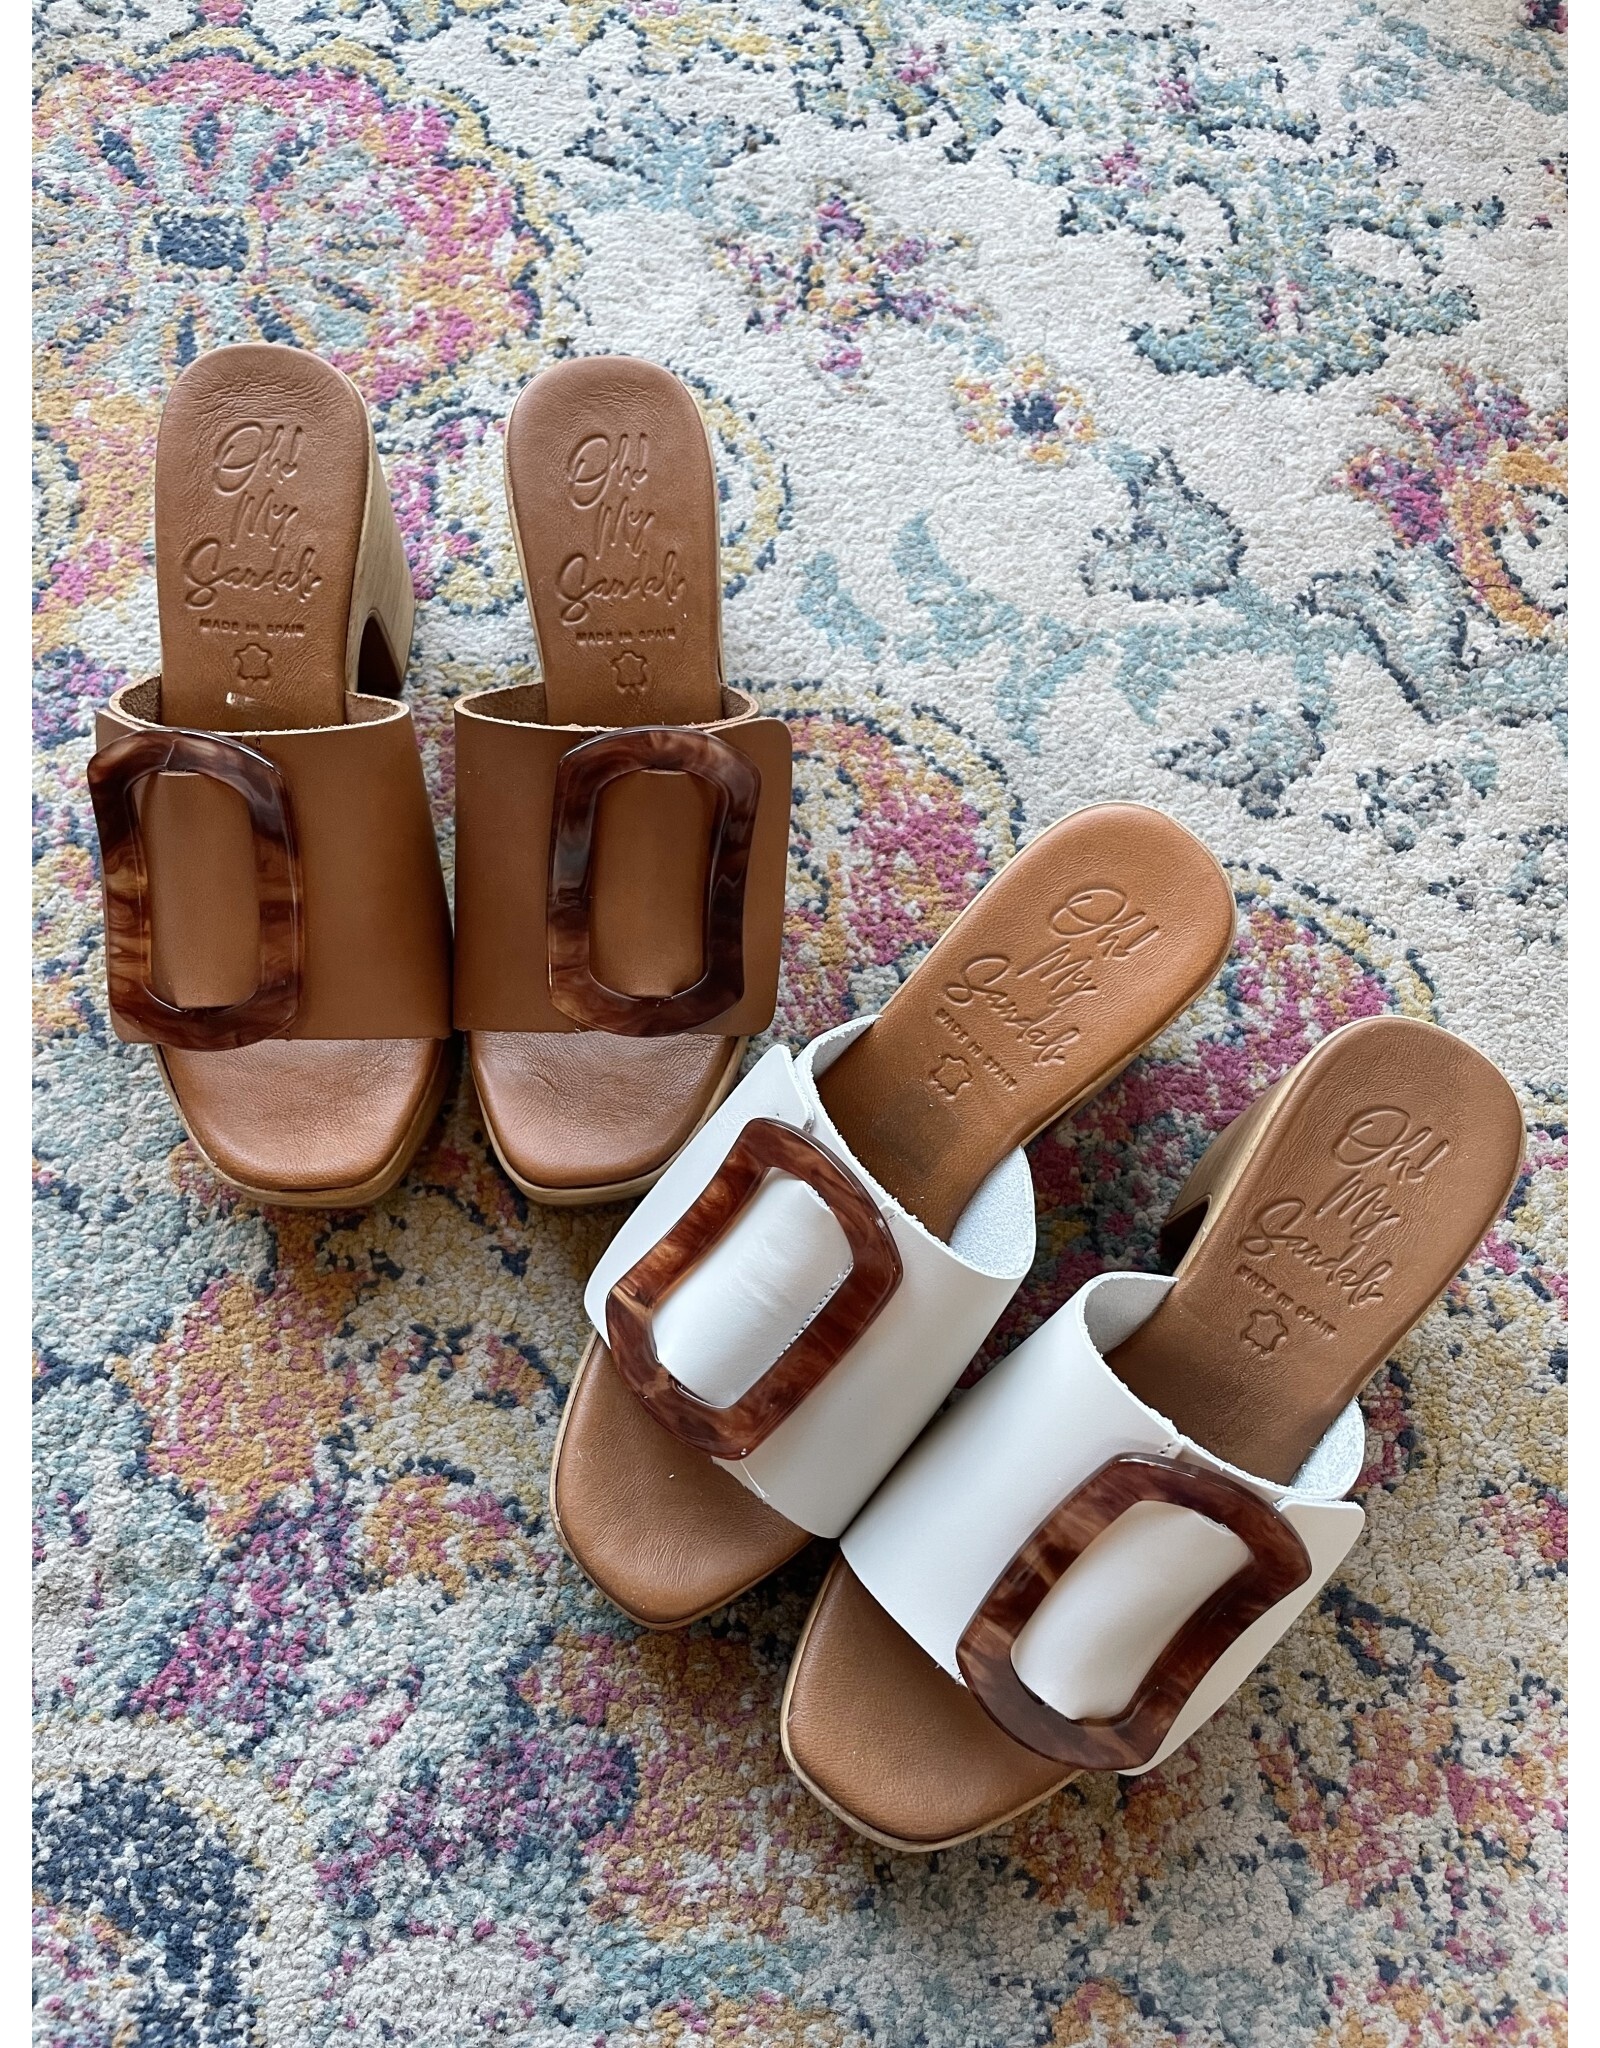 Oh My Sandals Oh My Sandals - 5246 (Roble - Oak)